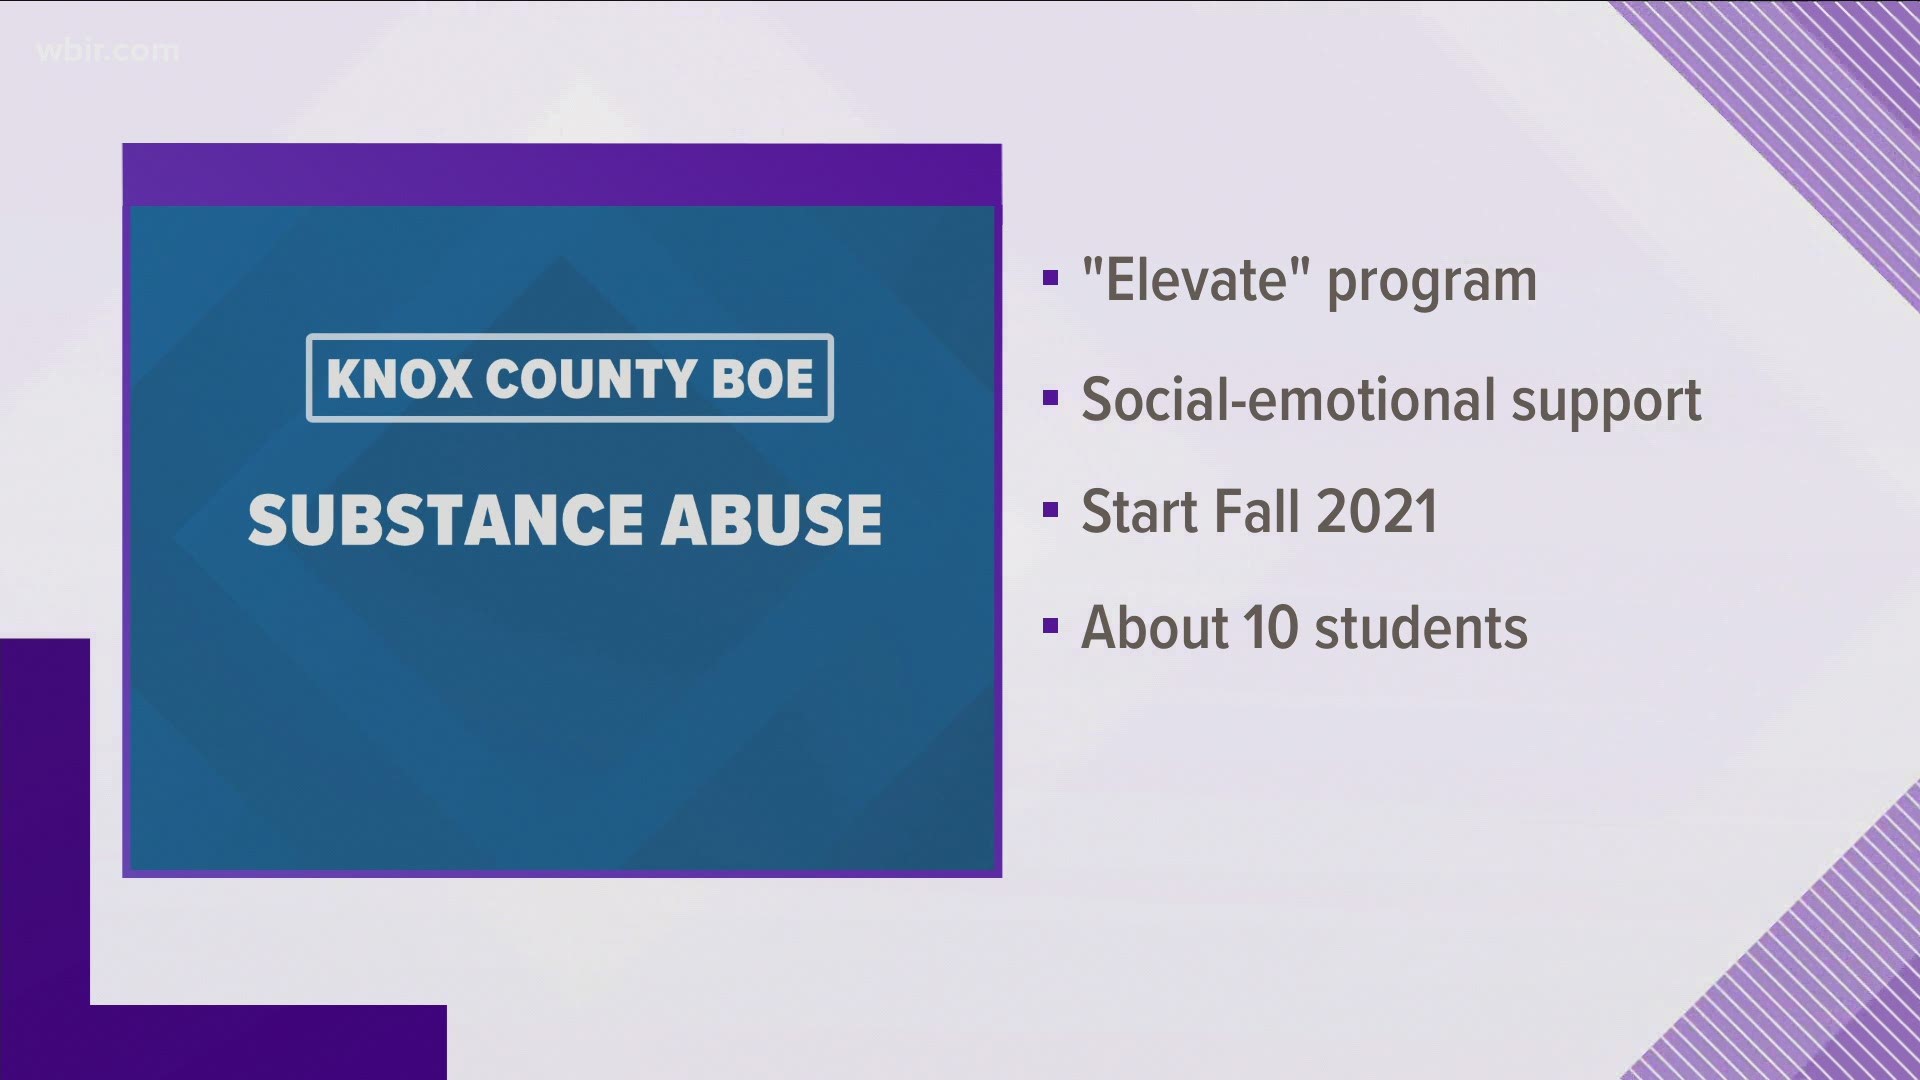 The Knox County board of education will consider a new high school program that would support students recovering from substance abuse.